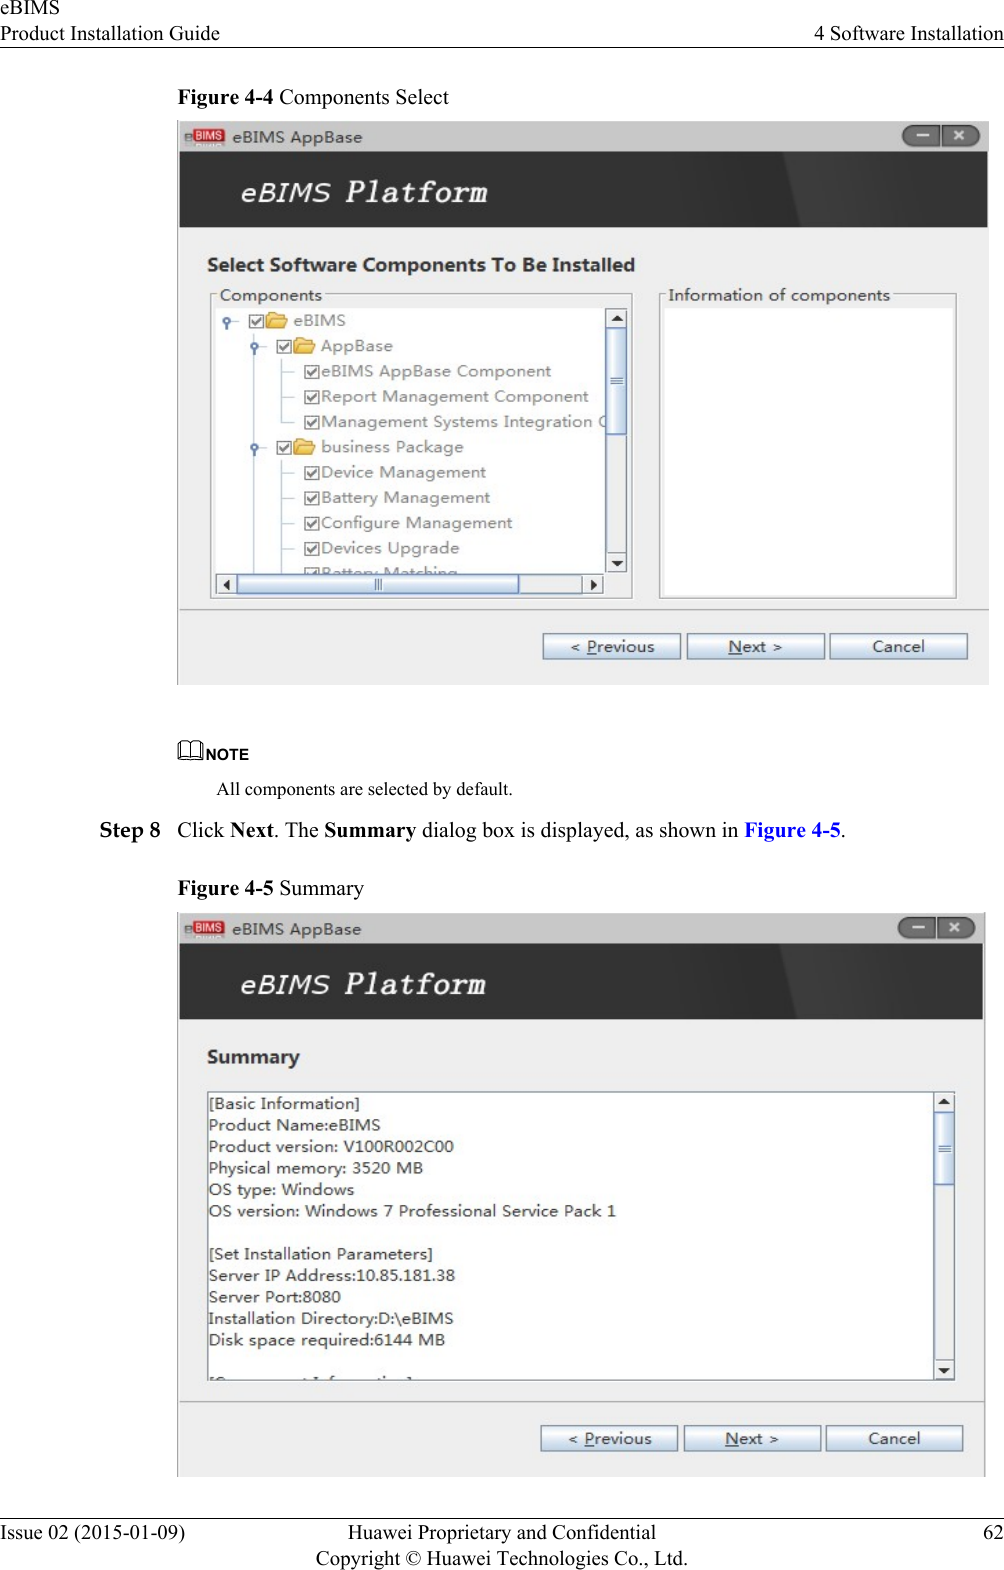 Figure 4-4 Components SelectNOTEAll components are selected by default.Step 8 Click Next. The Summary dialog box is displayed, as shown in Figure 4-5.Figure 4-5 SummaryeBIMSProduct Installation Guide 4 Software InstallationIssue 02 (2015-01-09) Huawei Proprietary and ConfidentialCopyright © Huawei Technologies Co., Ltd.62